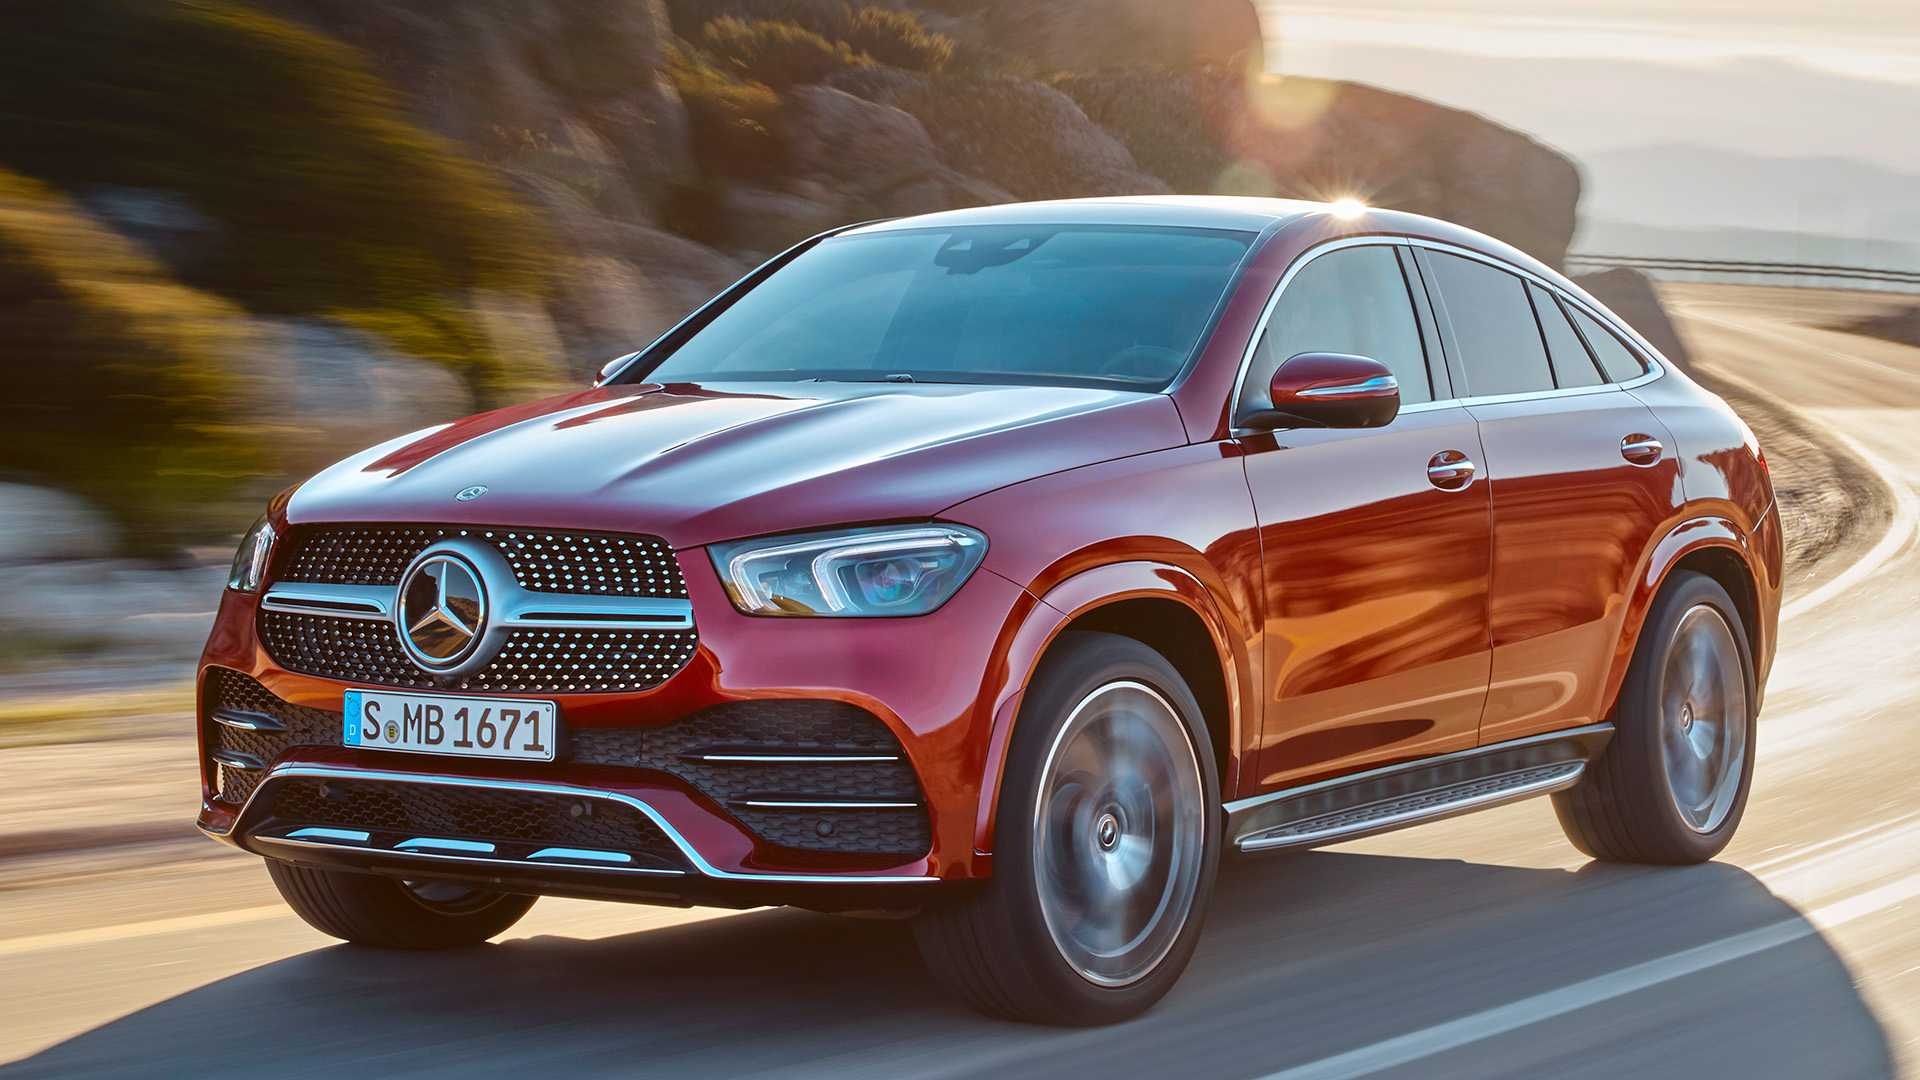 Stylish Mercedes-Benz GLE, Coupe model, Sophisticated design, Top-level performance, 1920x1080 Full HD Desktop